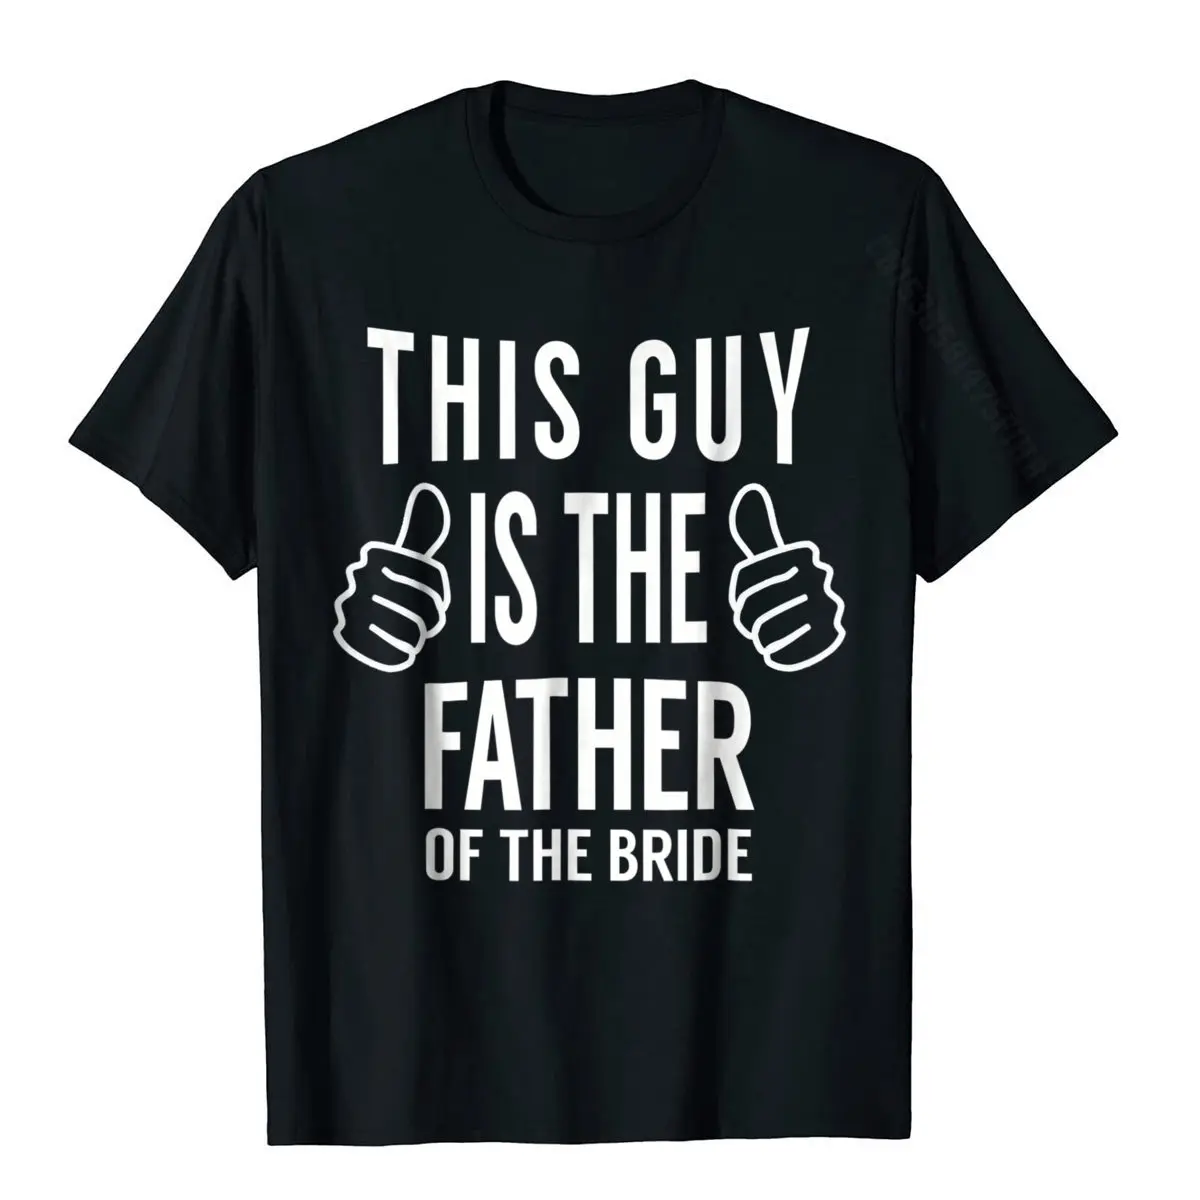 This Guy Is The Father Of The Bride Tshirt Gift Funny Tee Printing Men's Top T-Shirts Retro Cotton Tees Design